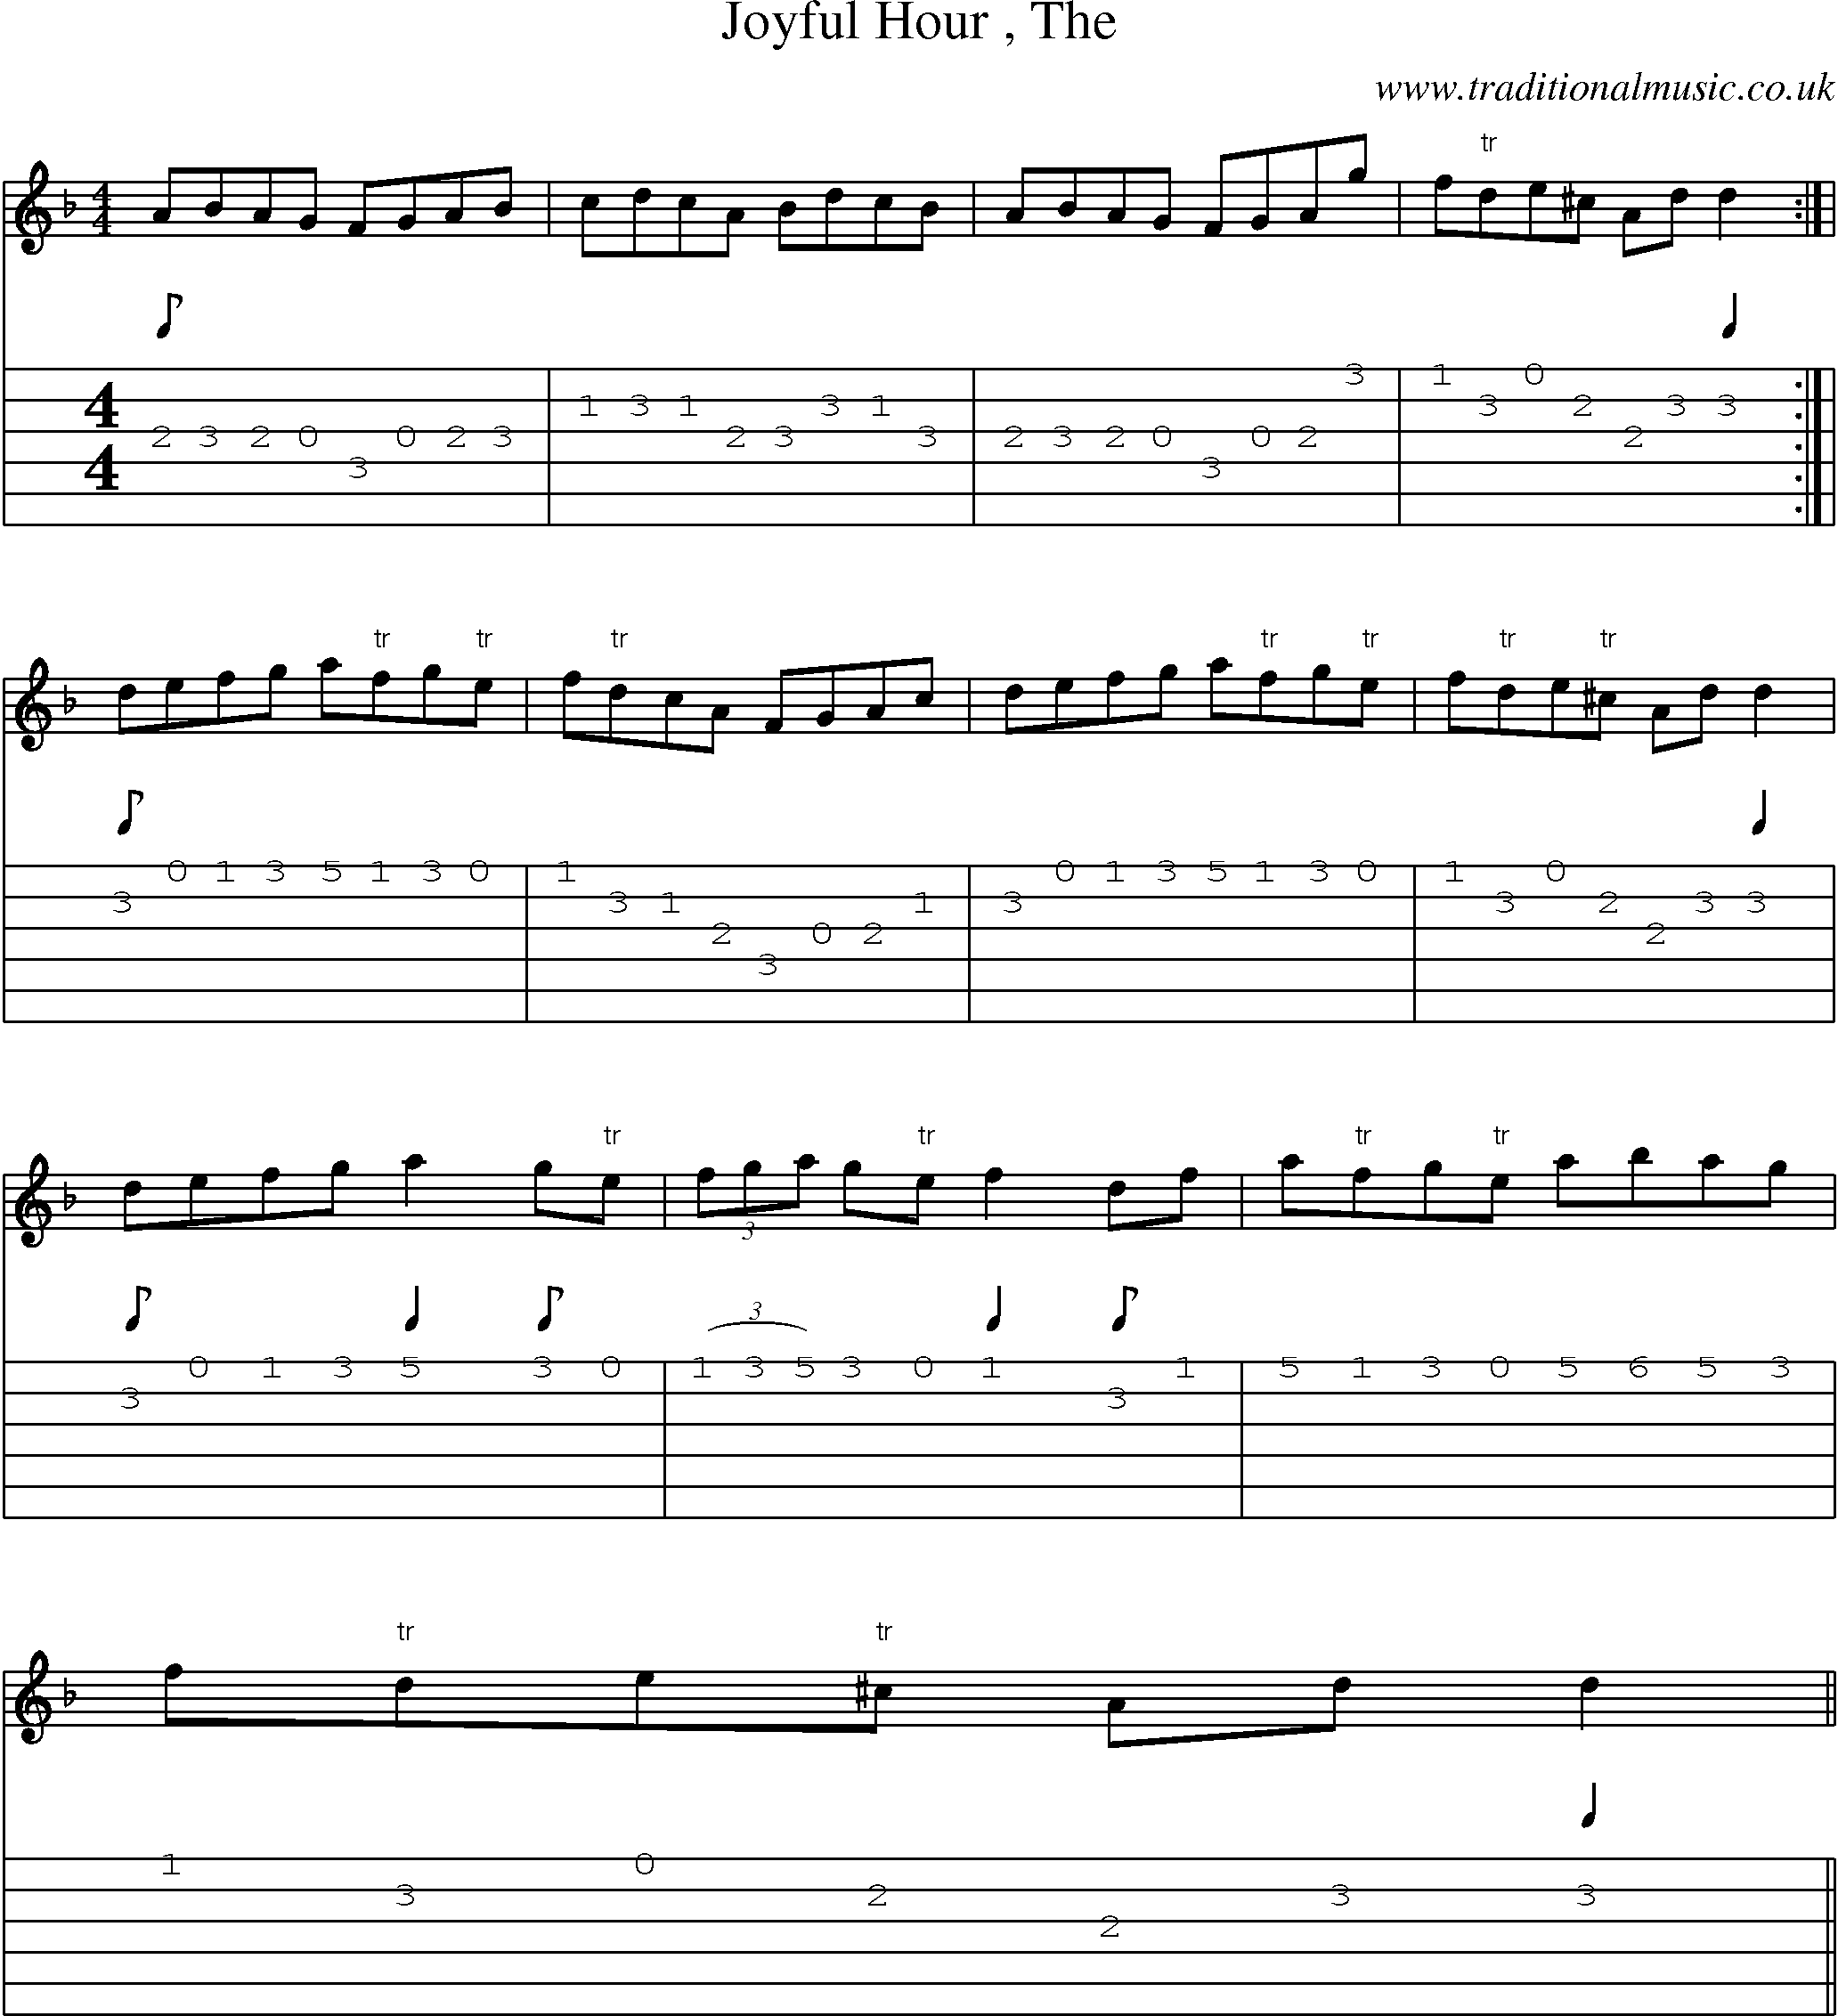 Music Score and Guitar Tabs for Joyful Hour